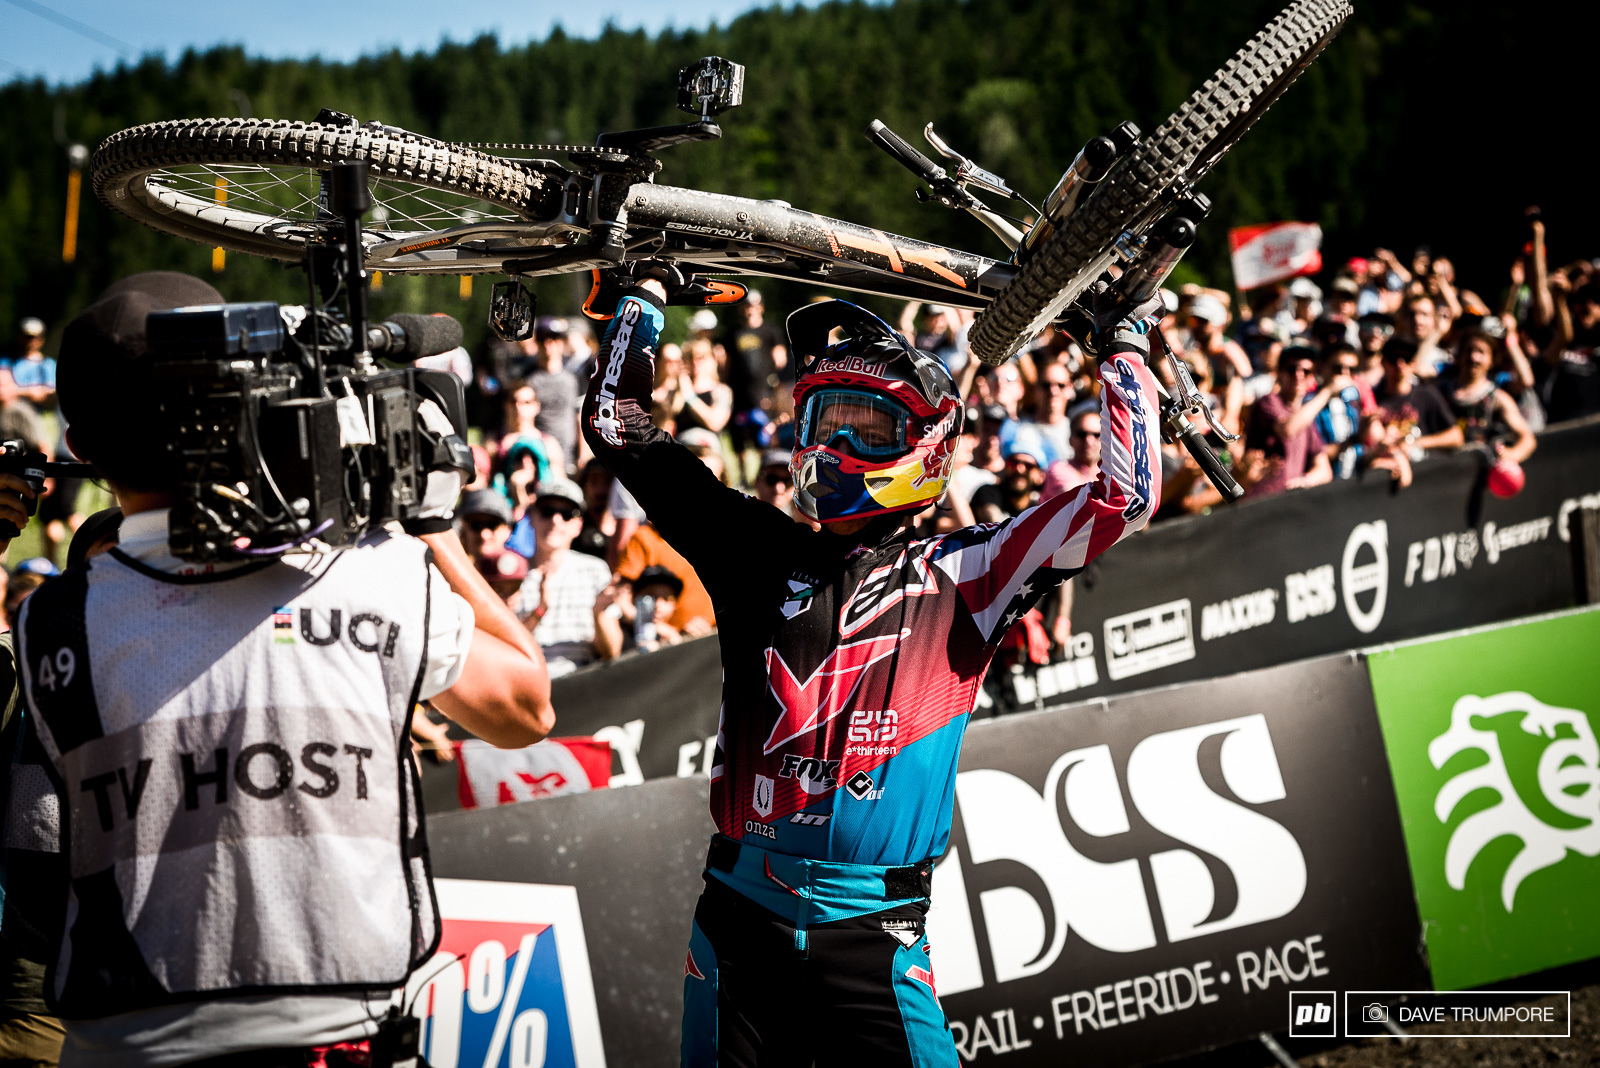 Today s winner Aaron Gwin makes it three in a row at Leogang.